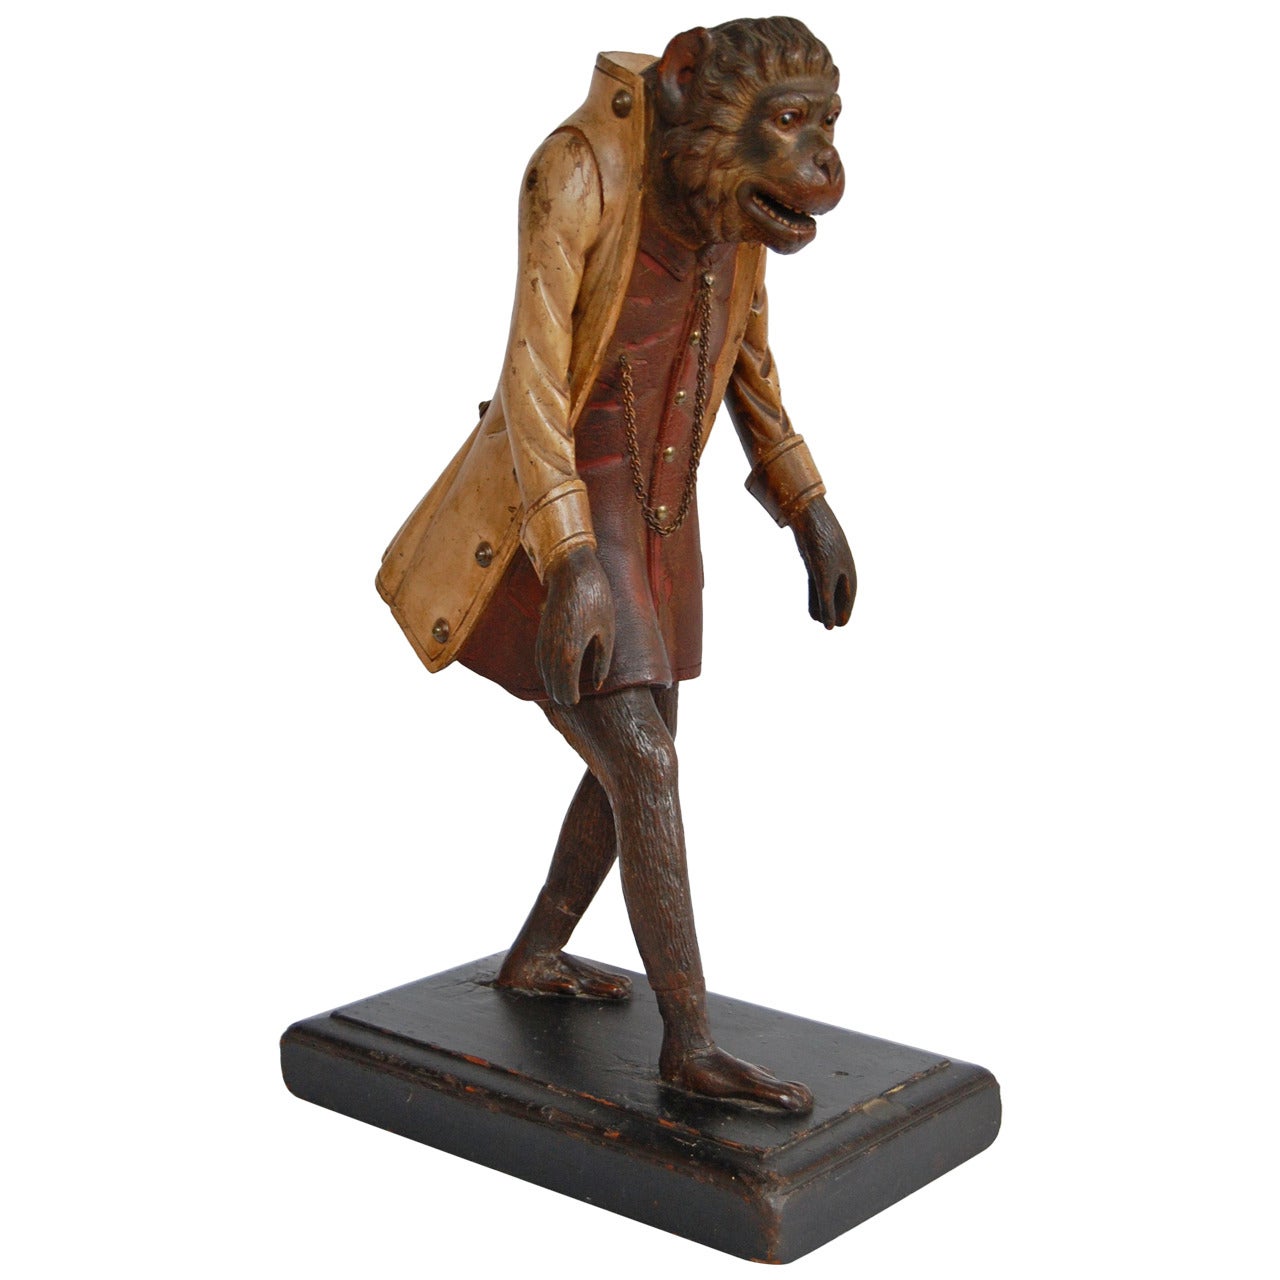 19th Century Carved Wooden Figure of an Upright Walking Monkey